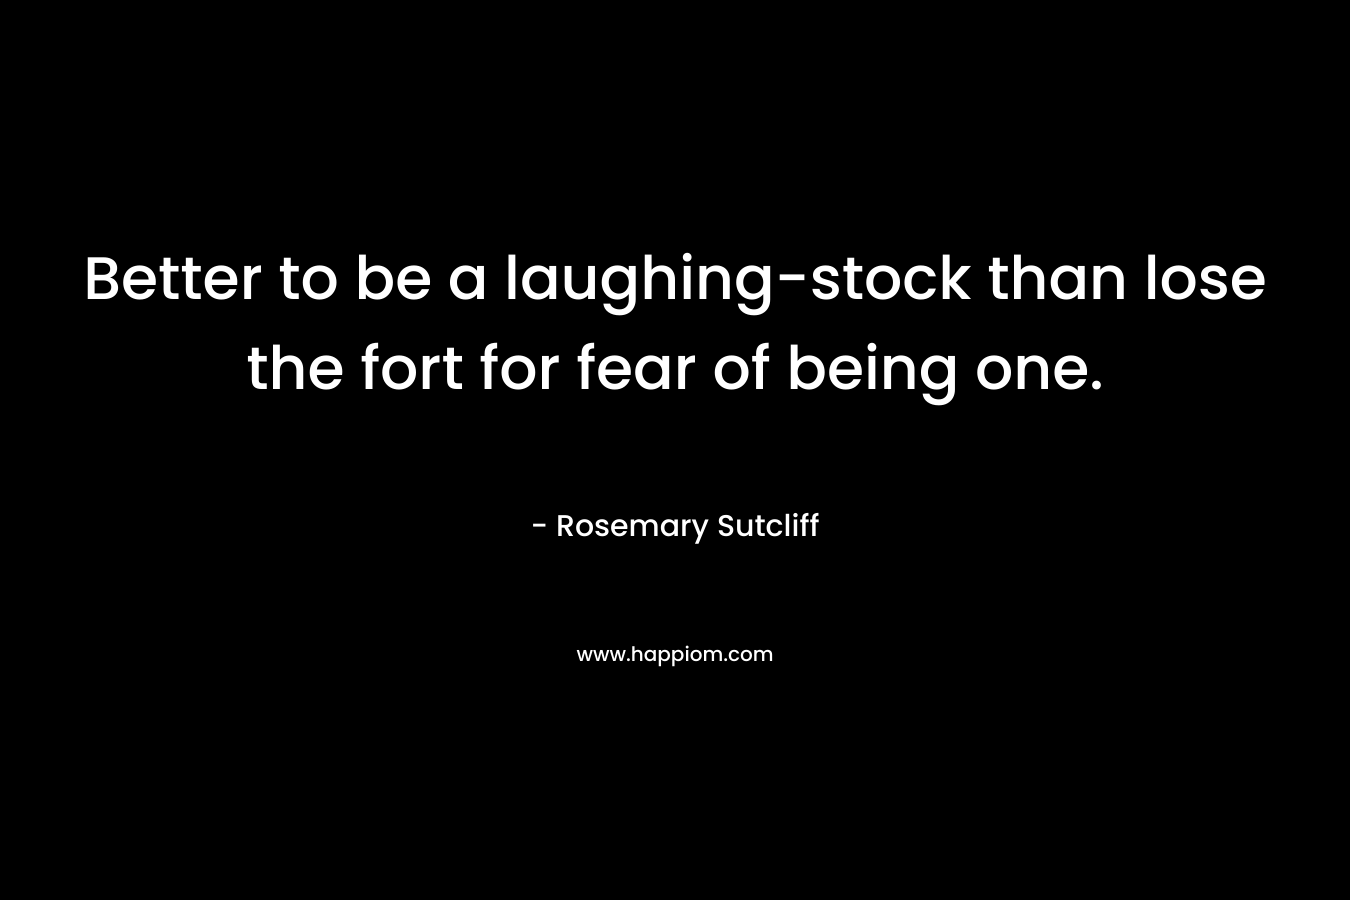 Better to be a laughing-stock than lose the fort for fear of being one. – Rosemary Sutcliff